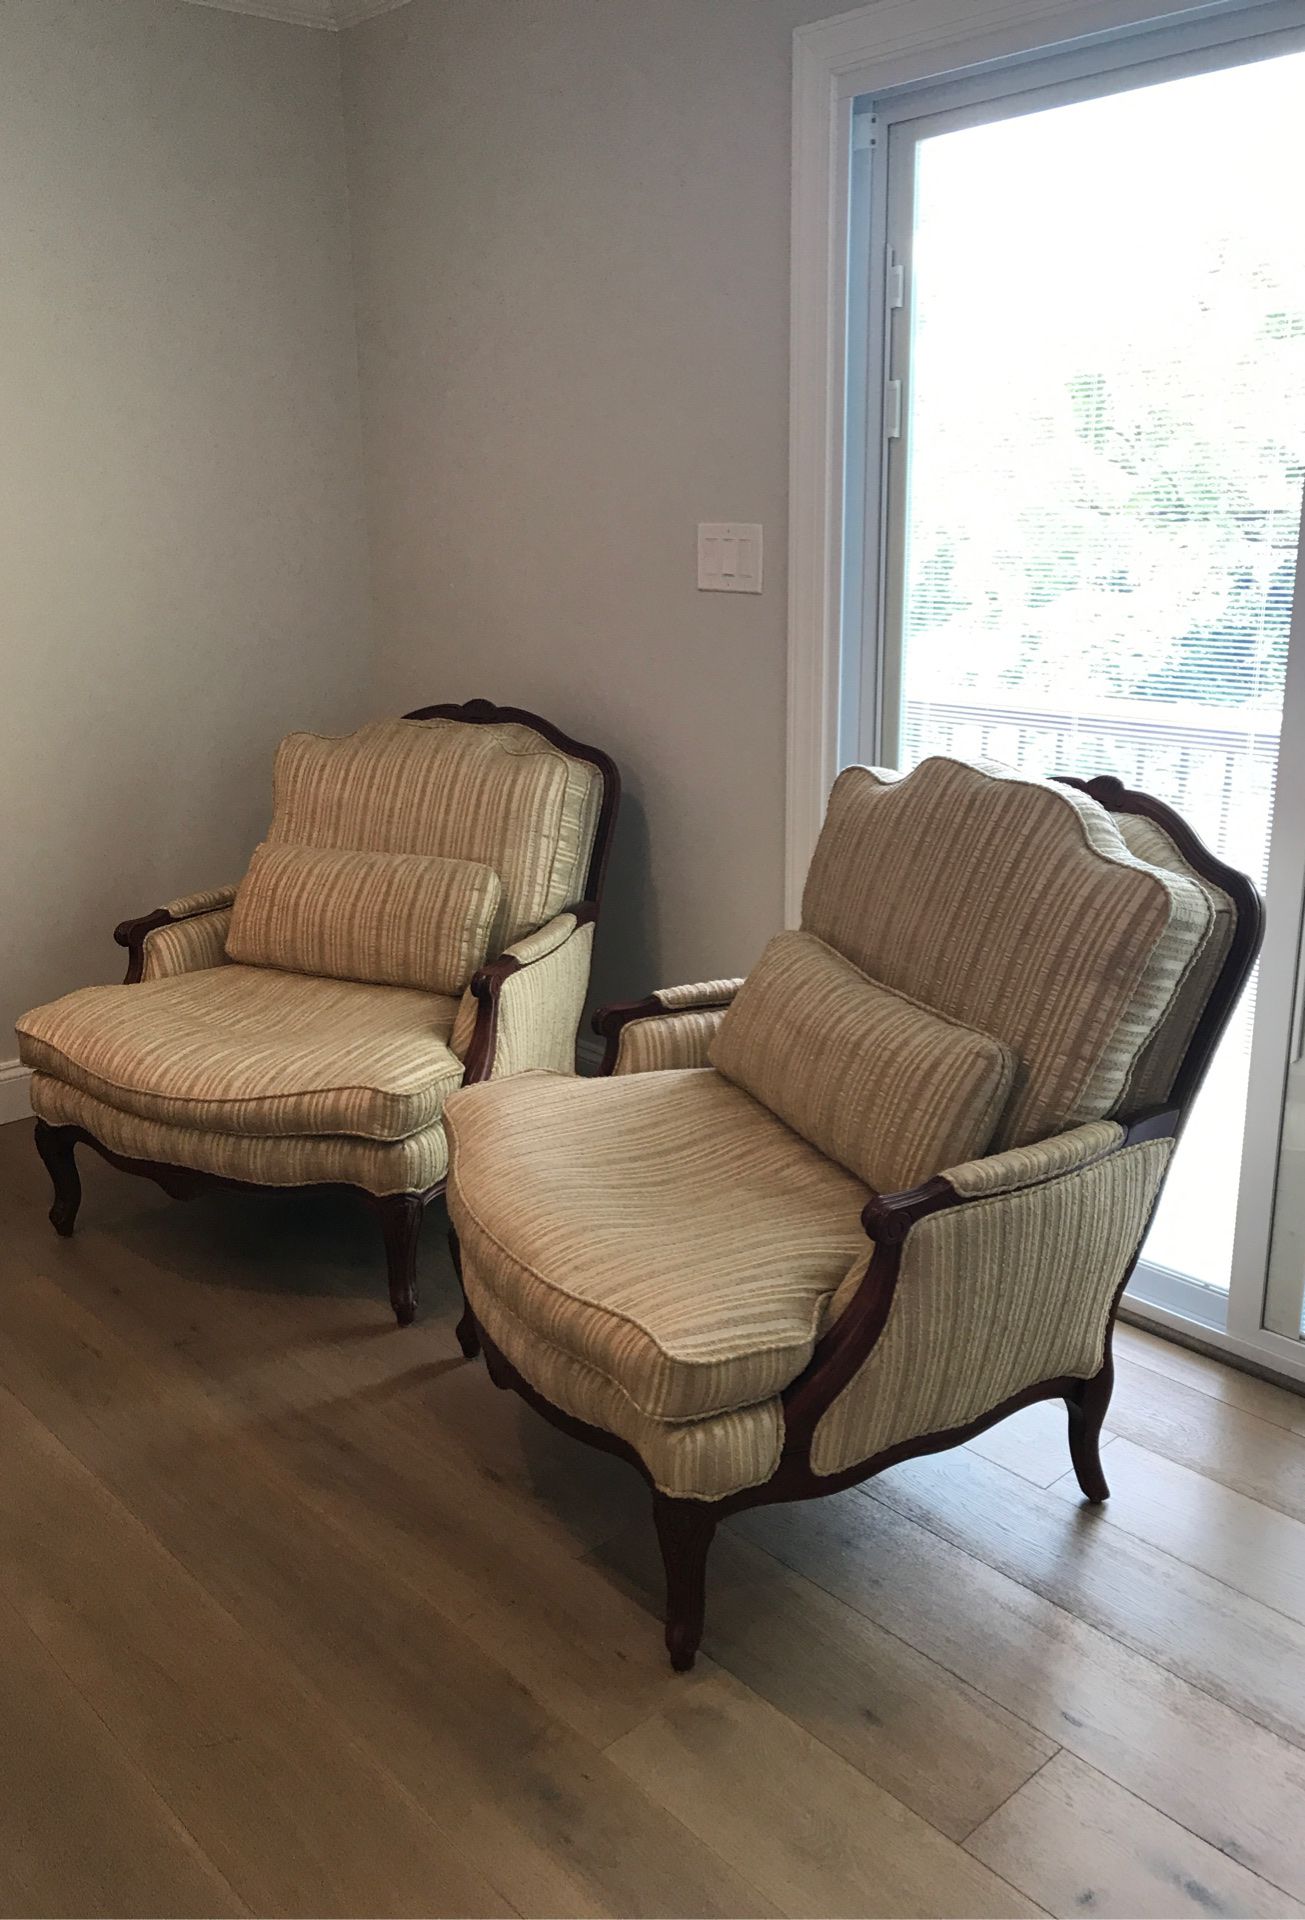 2 living room chairs by Norwalk Furniture Cherry/ Mahogany wood tone with cream colored fabric